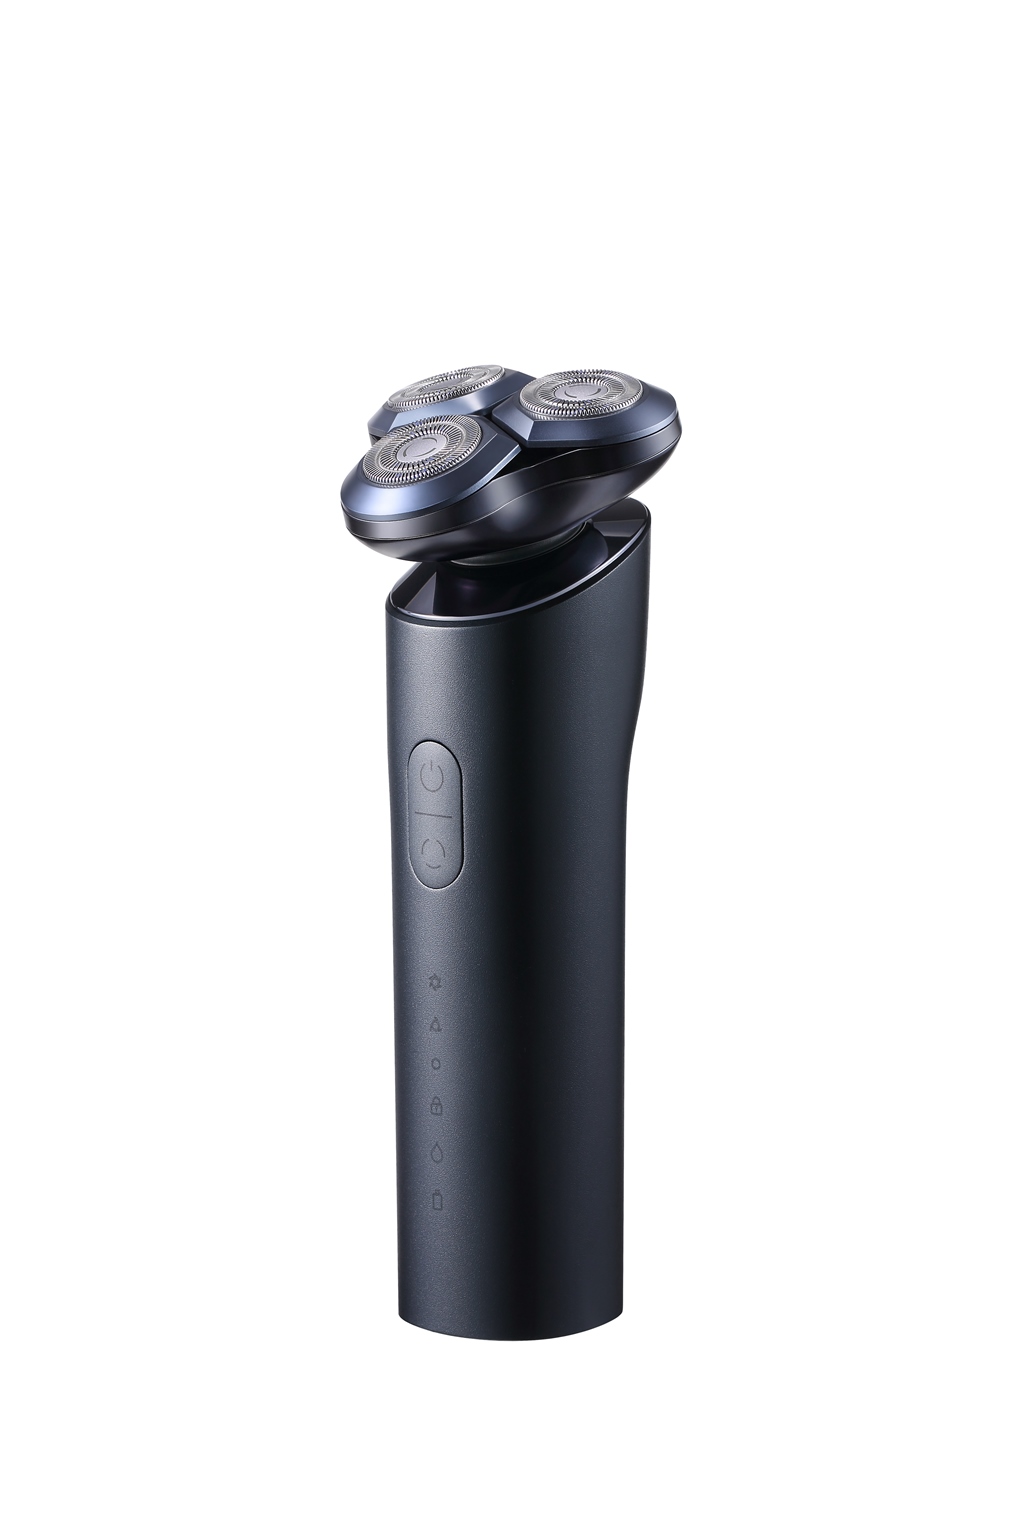 Xiaomi Electric Shaver S700, , large image number 4